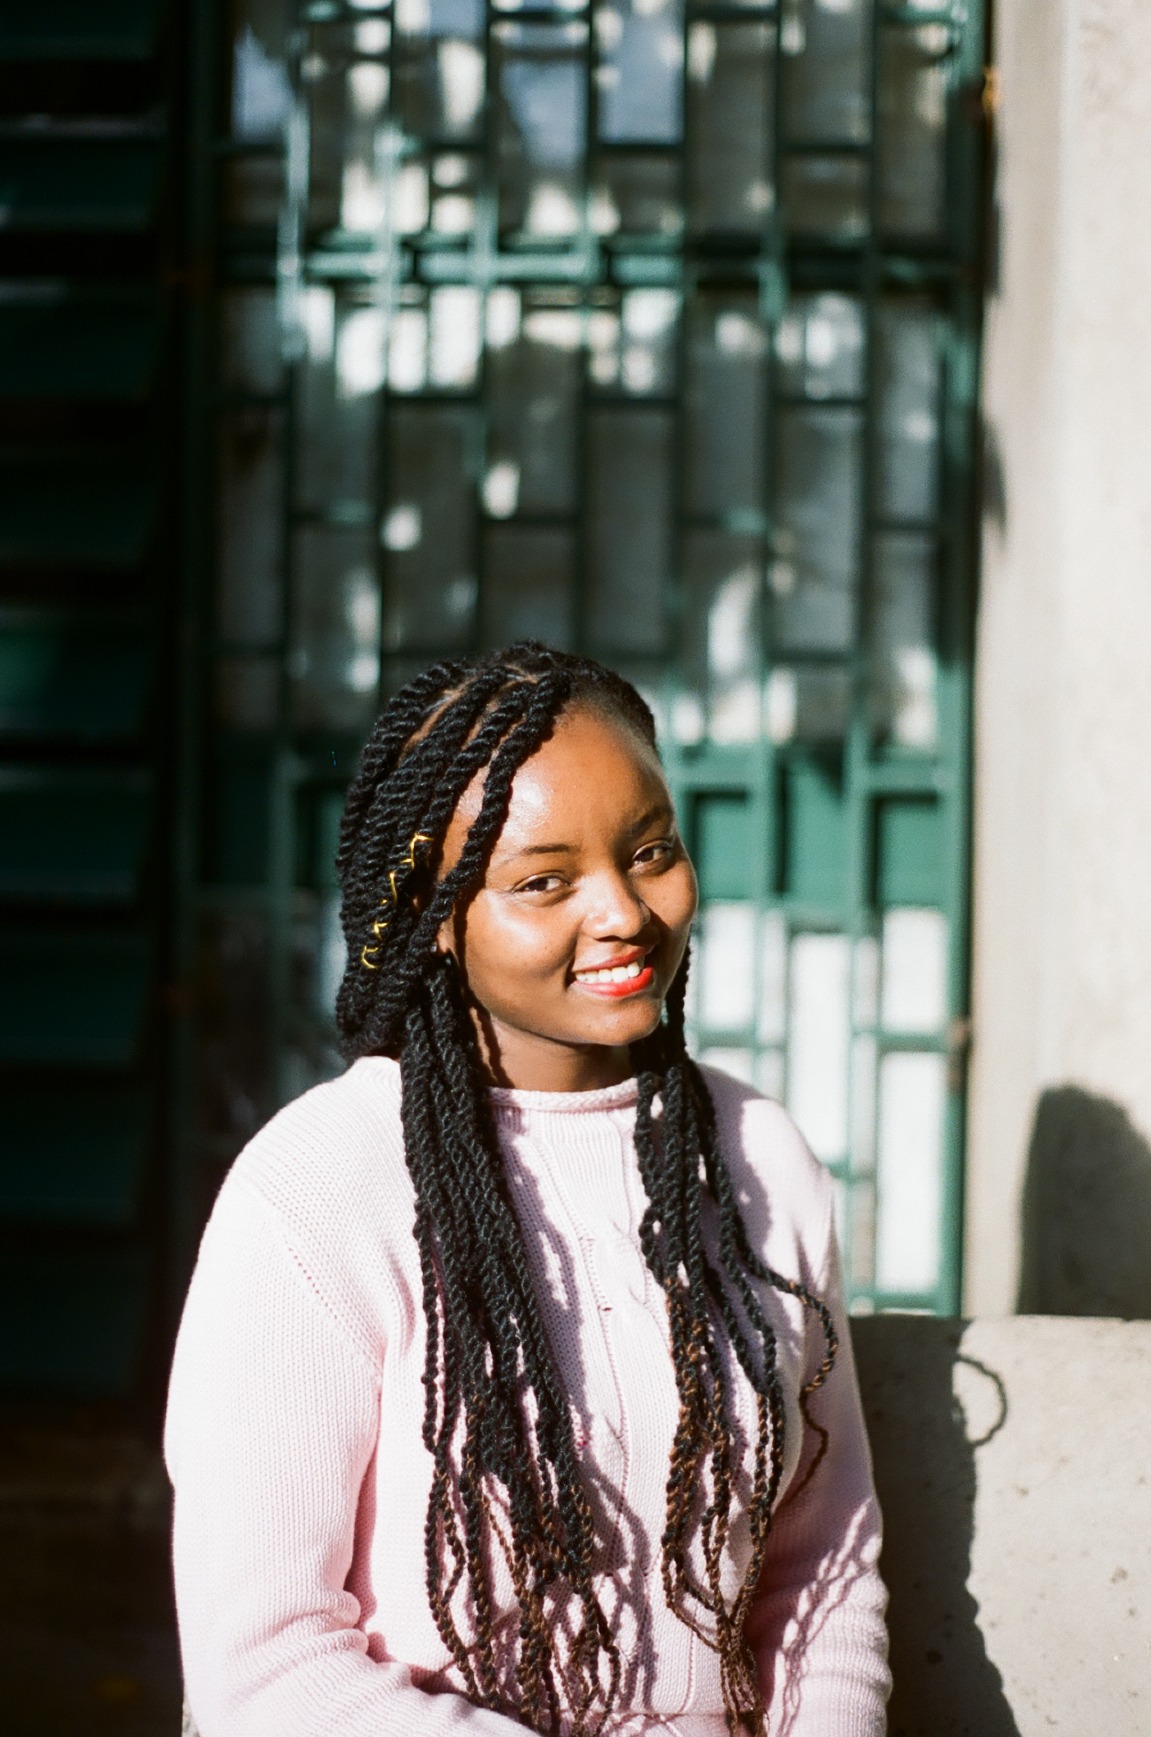 Photo portrait of young African woman smiling with braids and a pink jumper.